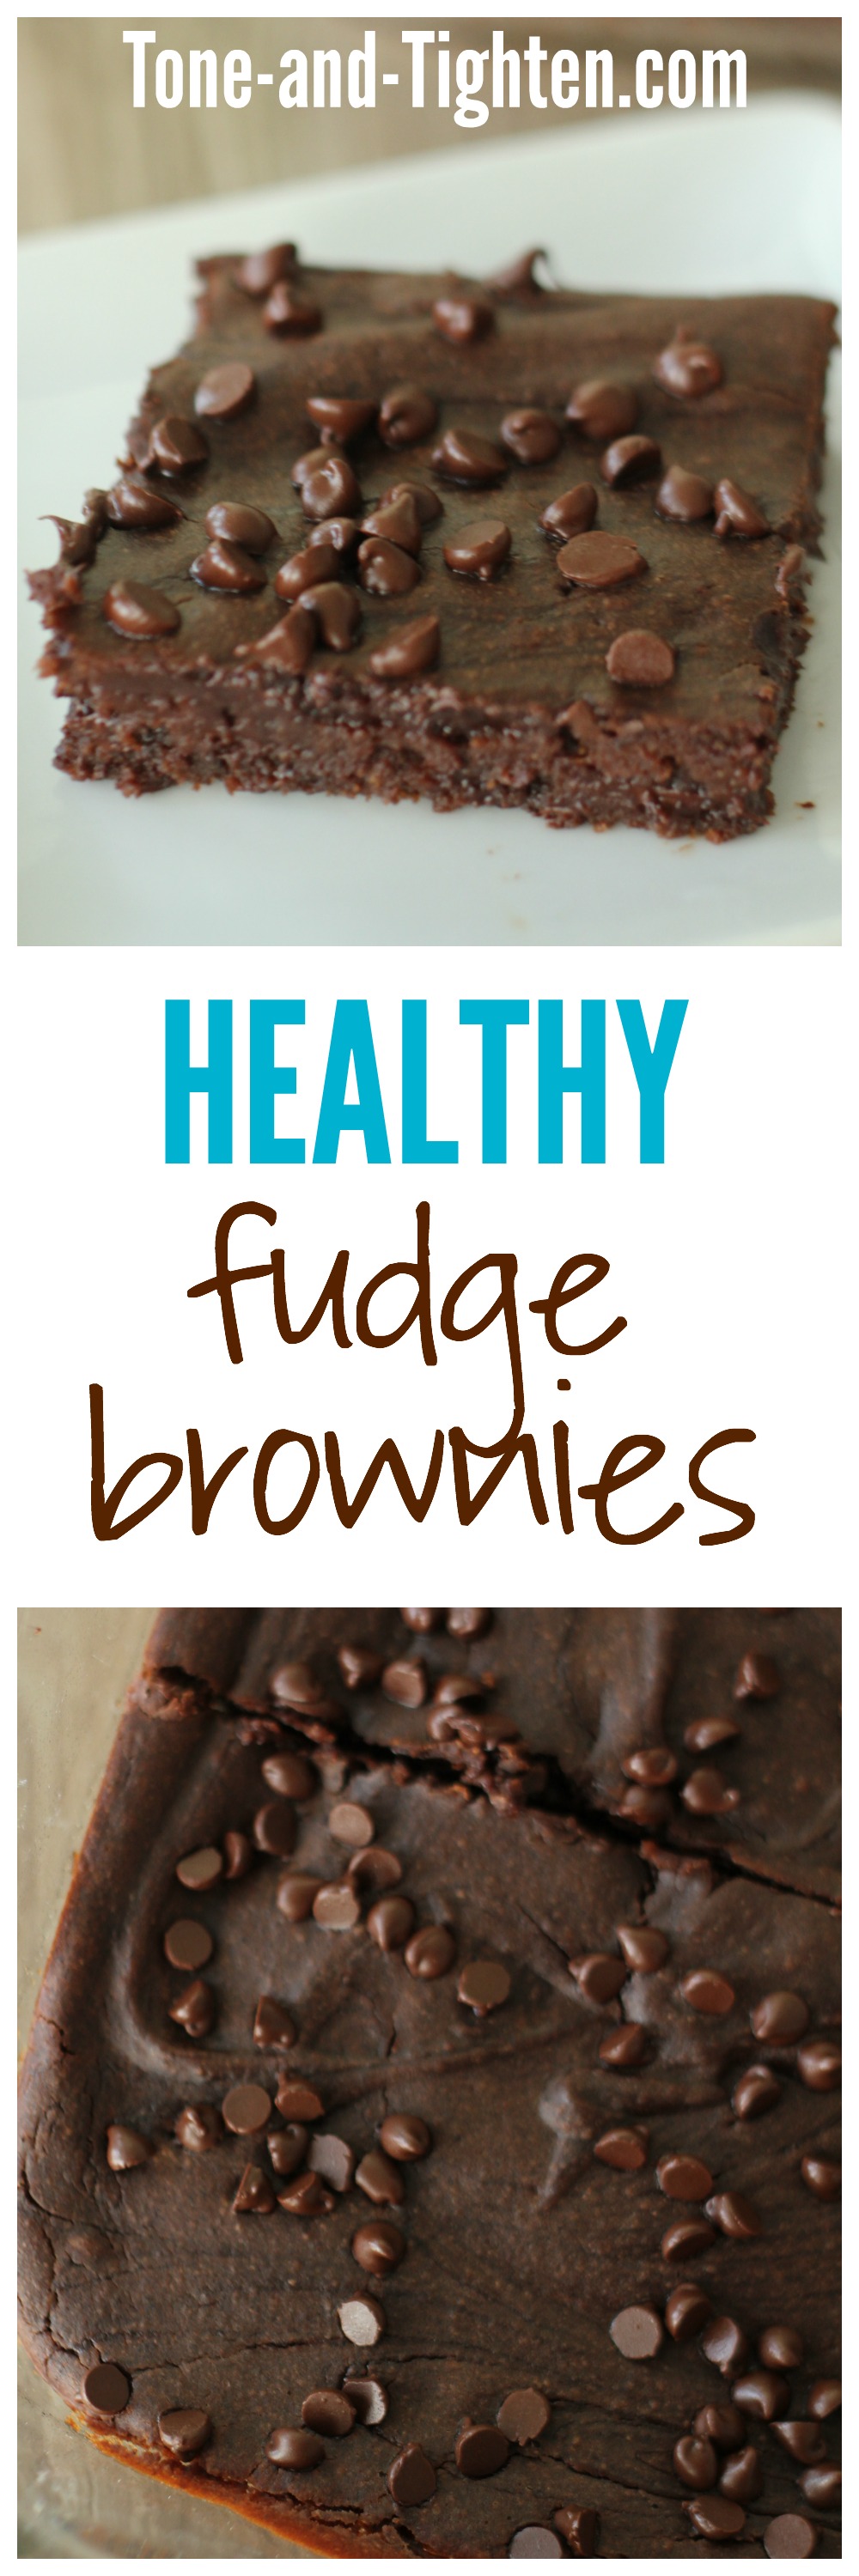 Healthy Fudge Brownies from Tone-and-Tighten